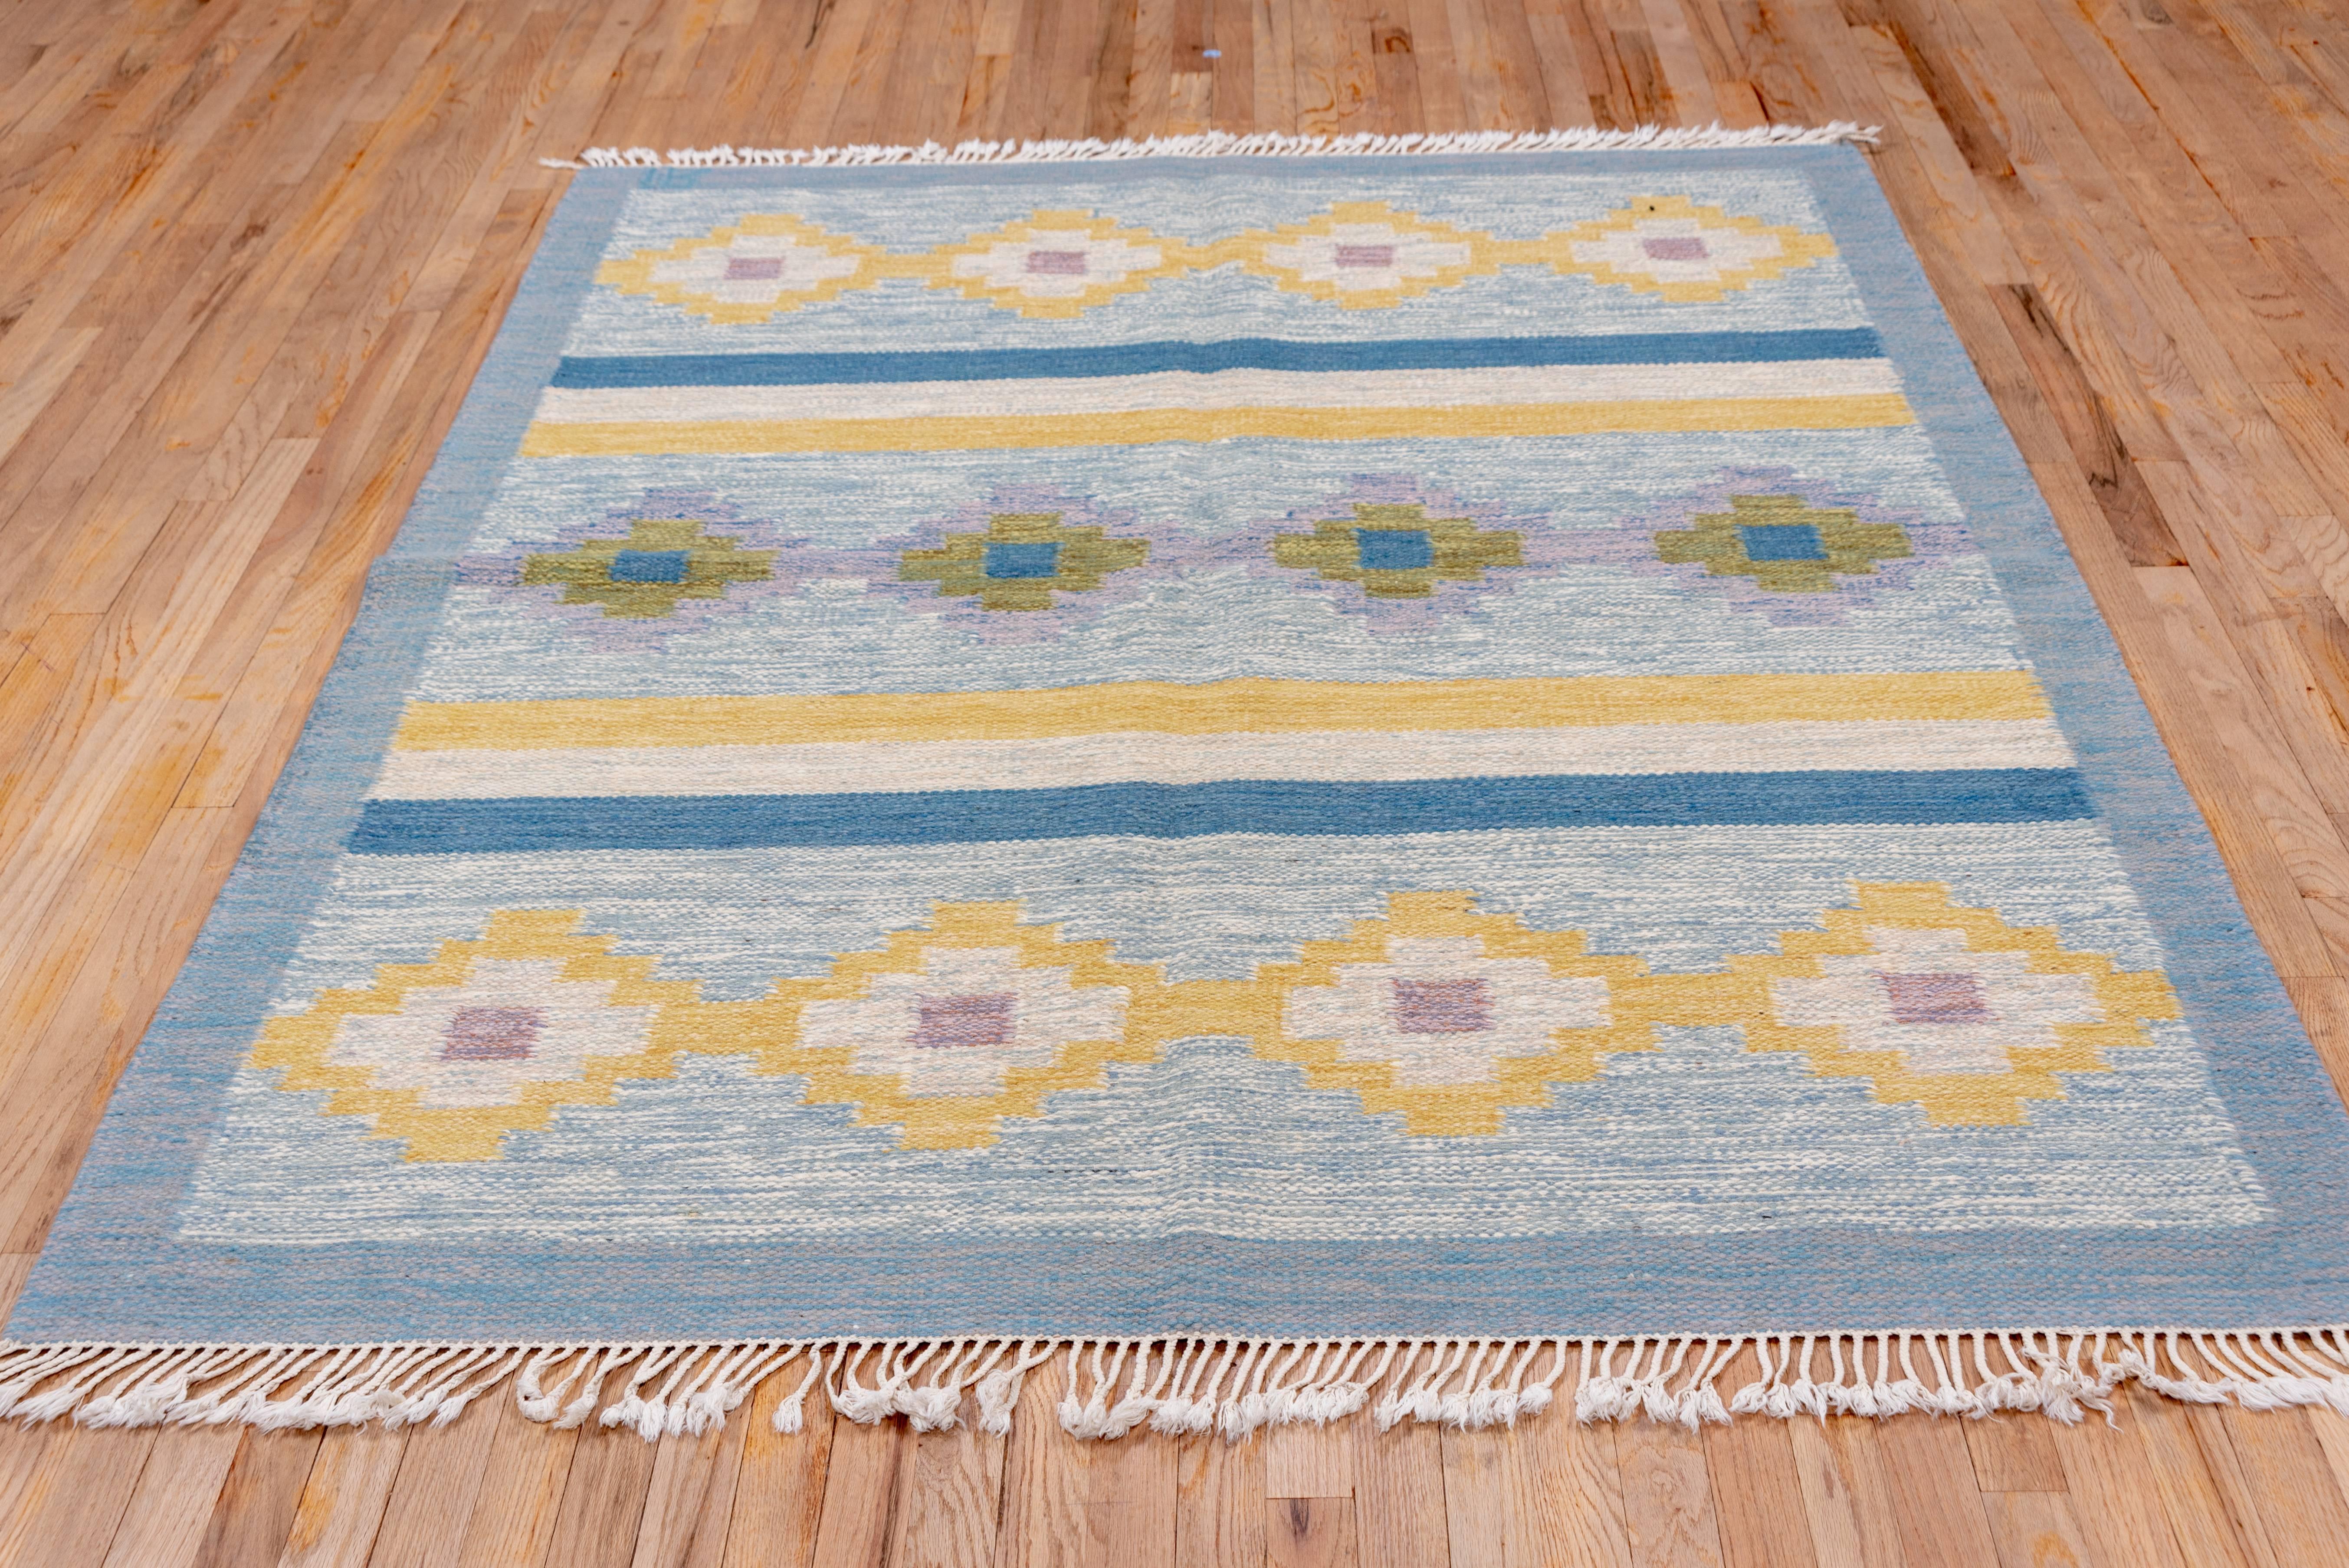 Rollakens are the perfect rug for a city apartment or beach house. They are contemporary and bold in design and balanced by a wonderful soft palette which makes them extremely decorative and easy to work with.